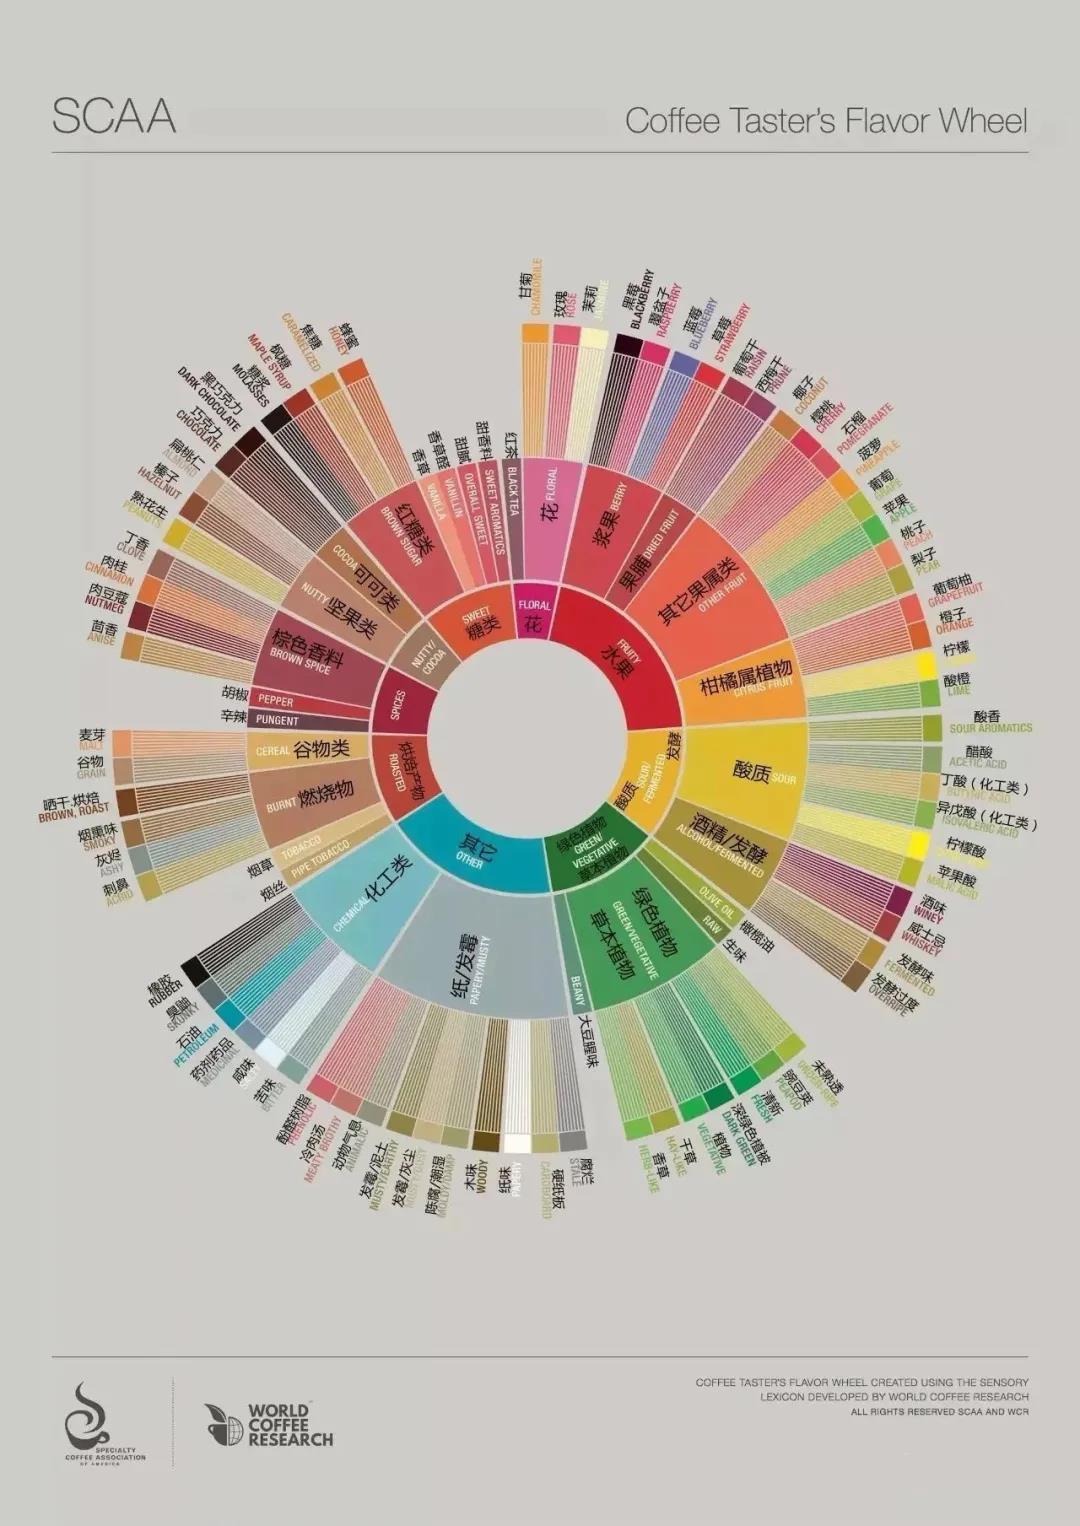 How to use the coffee flavor wheel correctly? what is the difference between the old coffee flavor wheel and the new coffee flavor wheel?